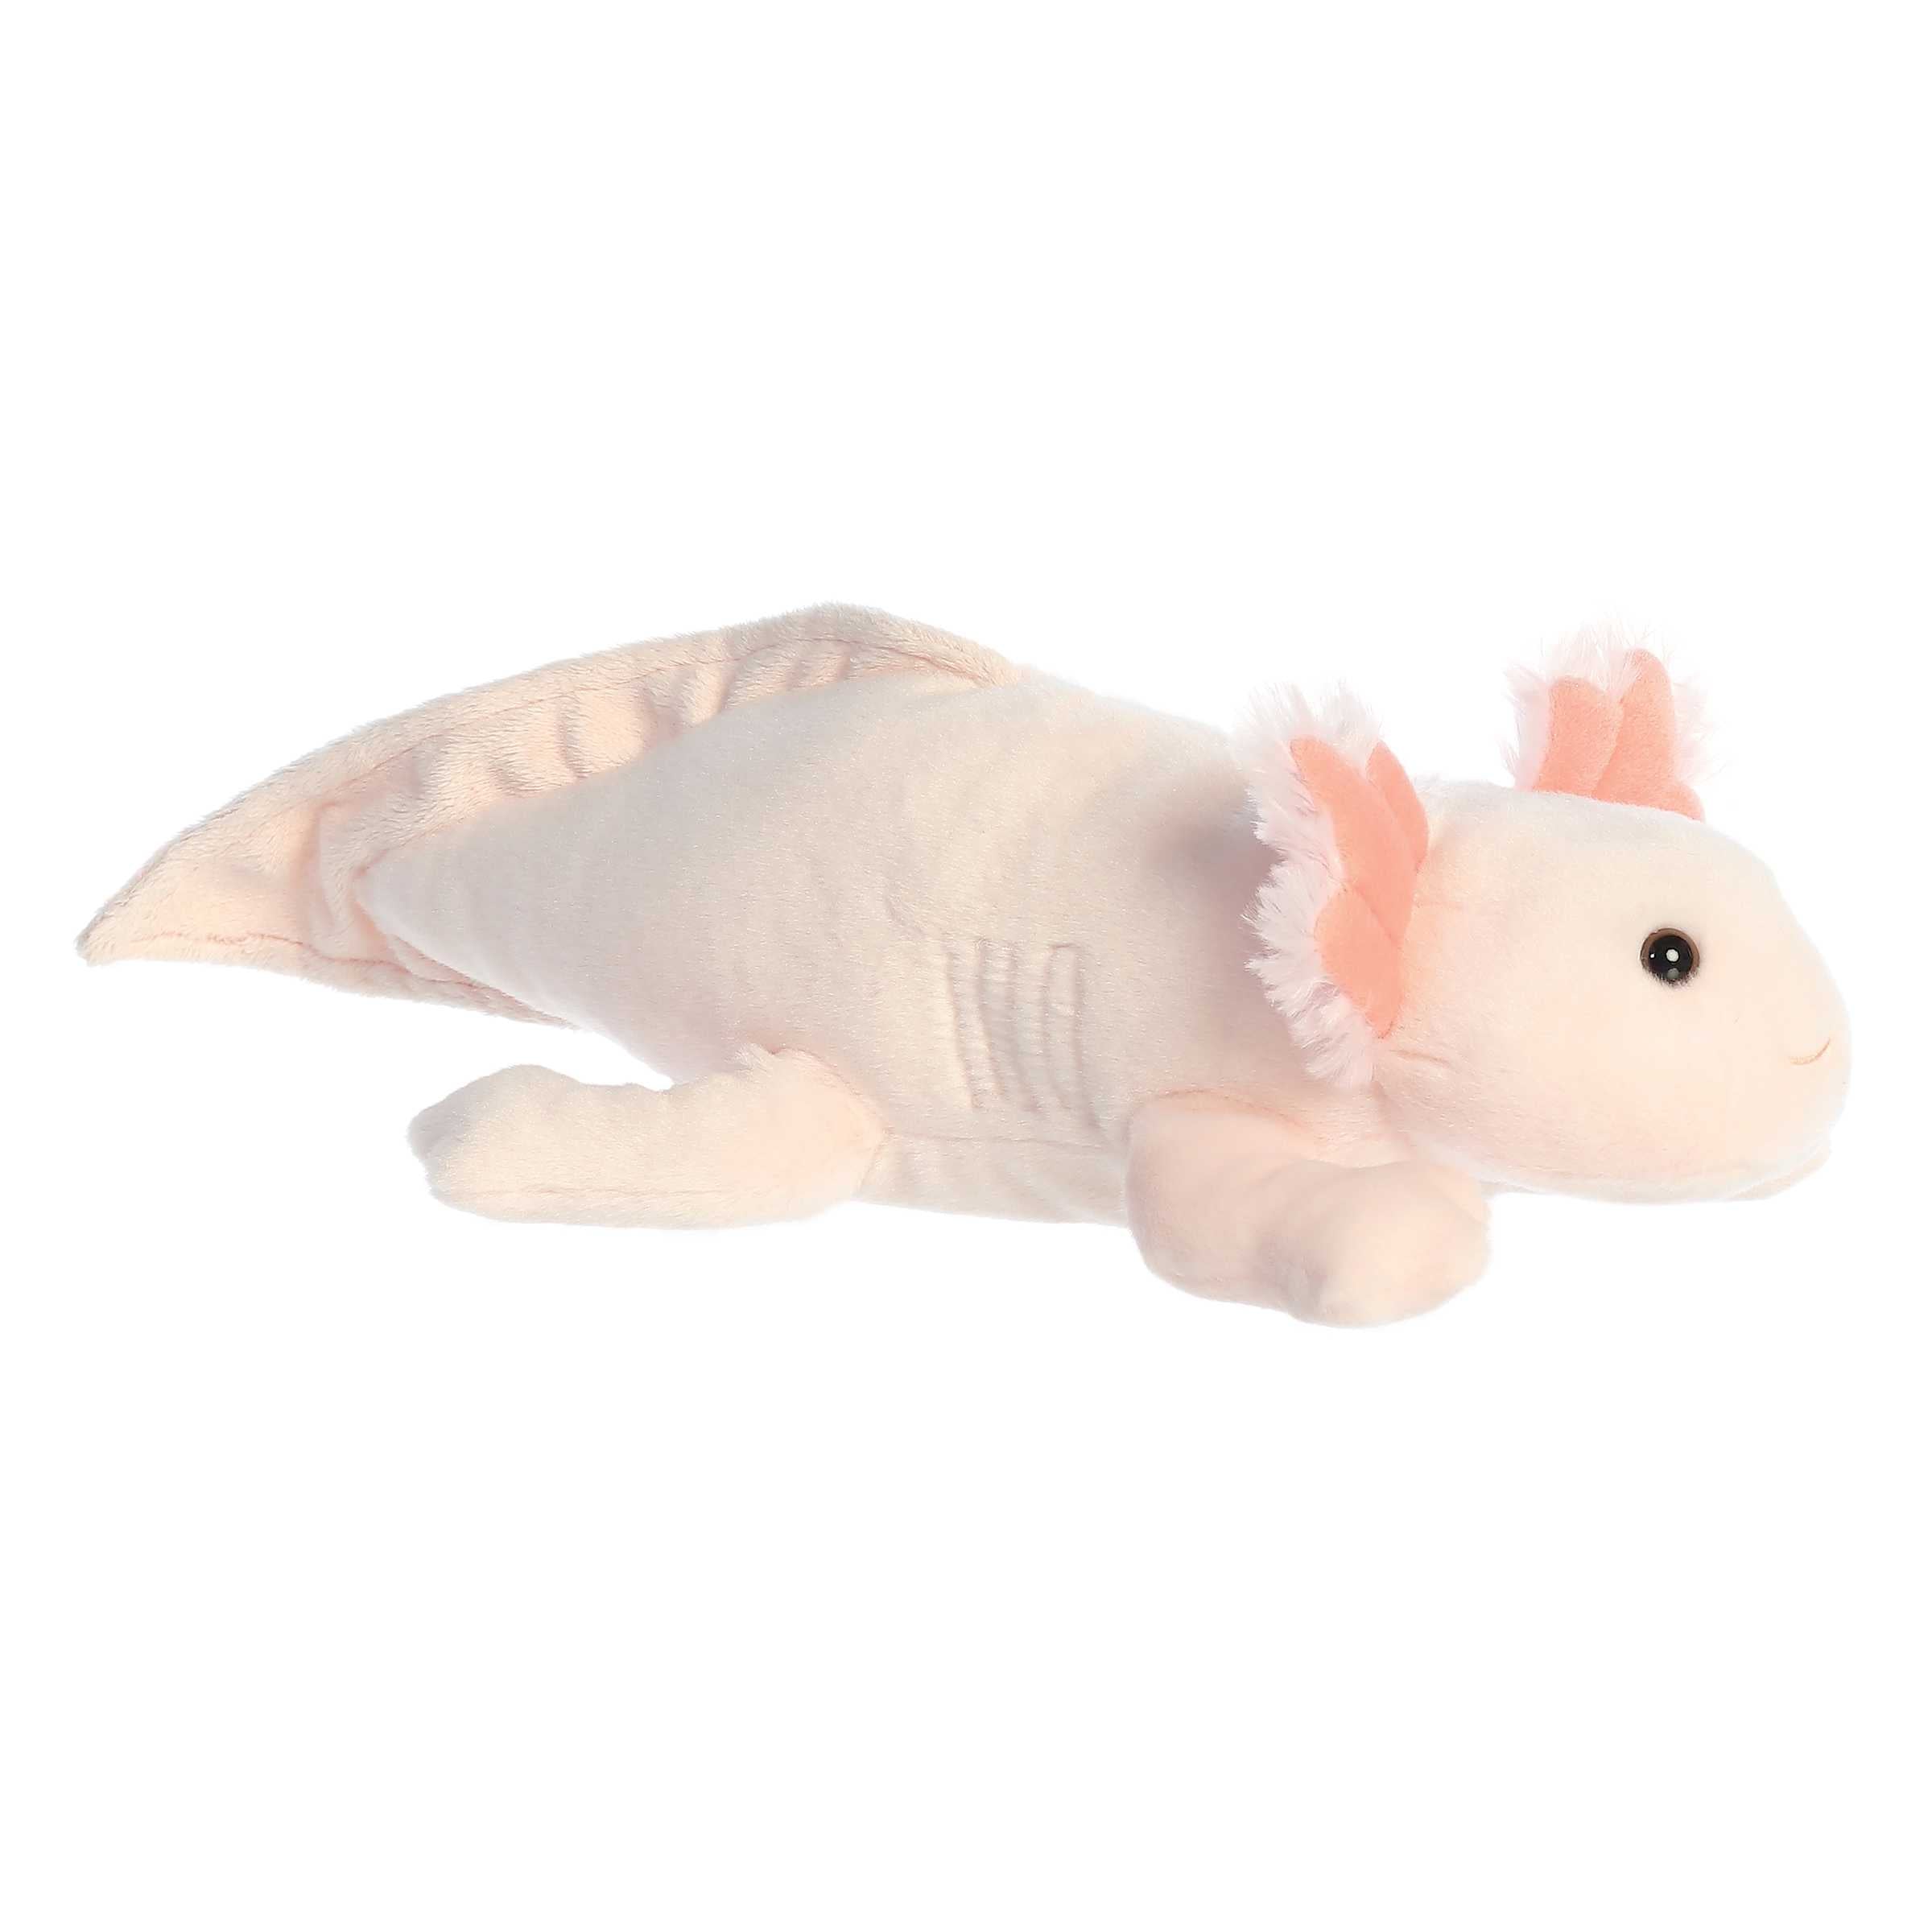 Vibrant pink Flopsie Axolotl plush with playful gills, ideal for imaginative play and education.